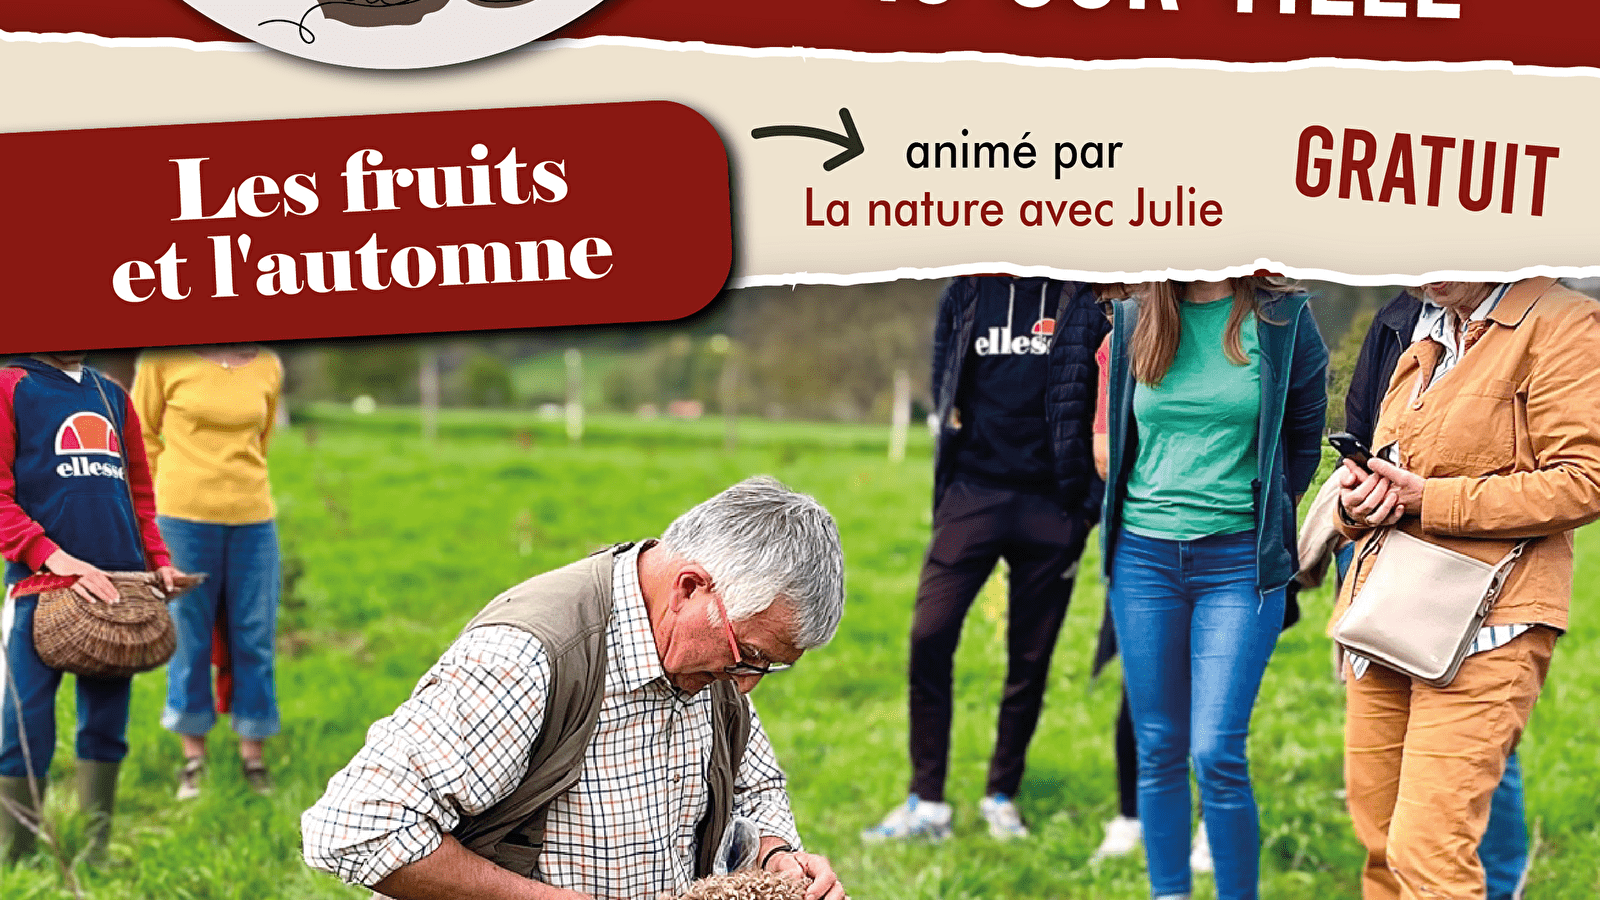 Animations at the truffle farm: fruits and autumn